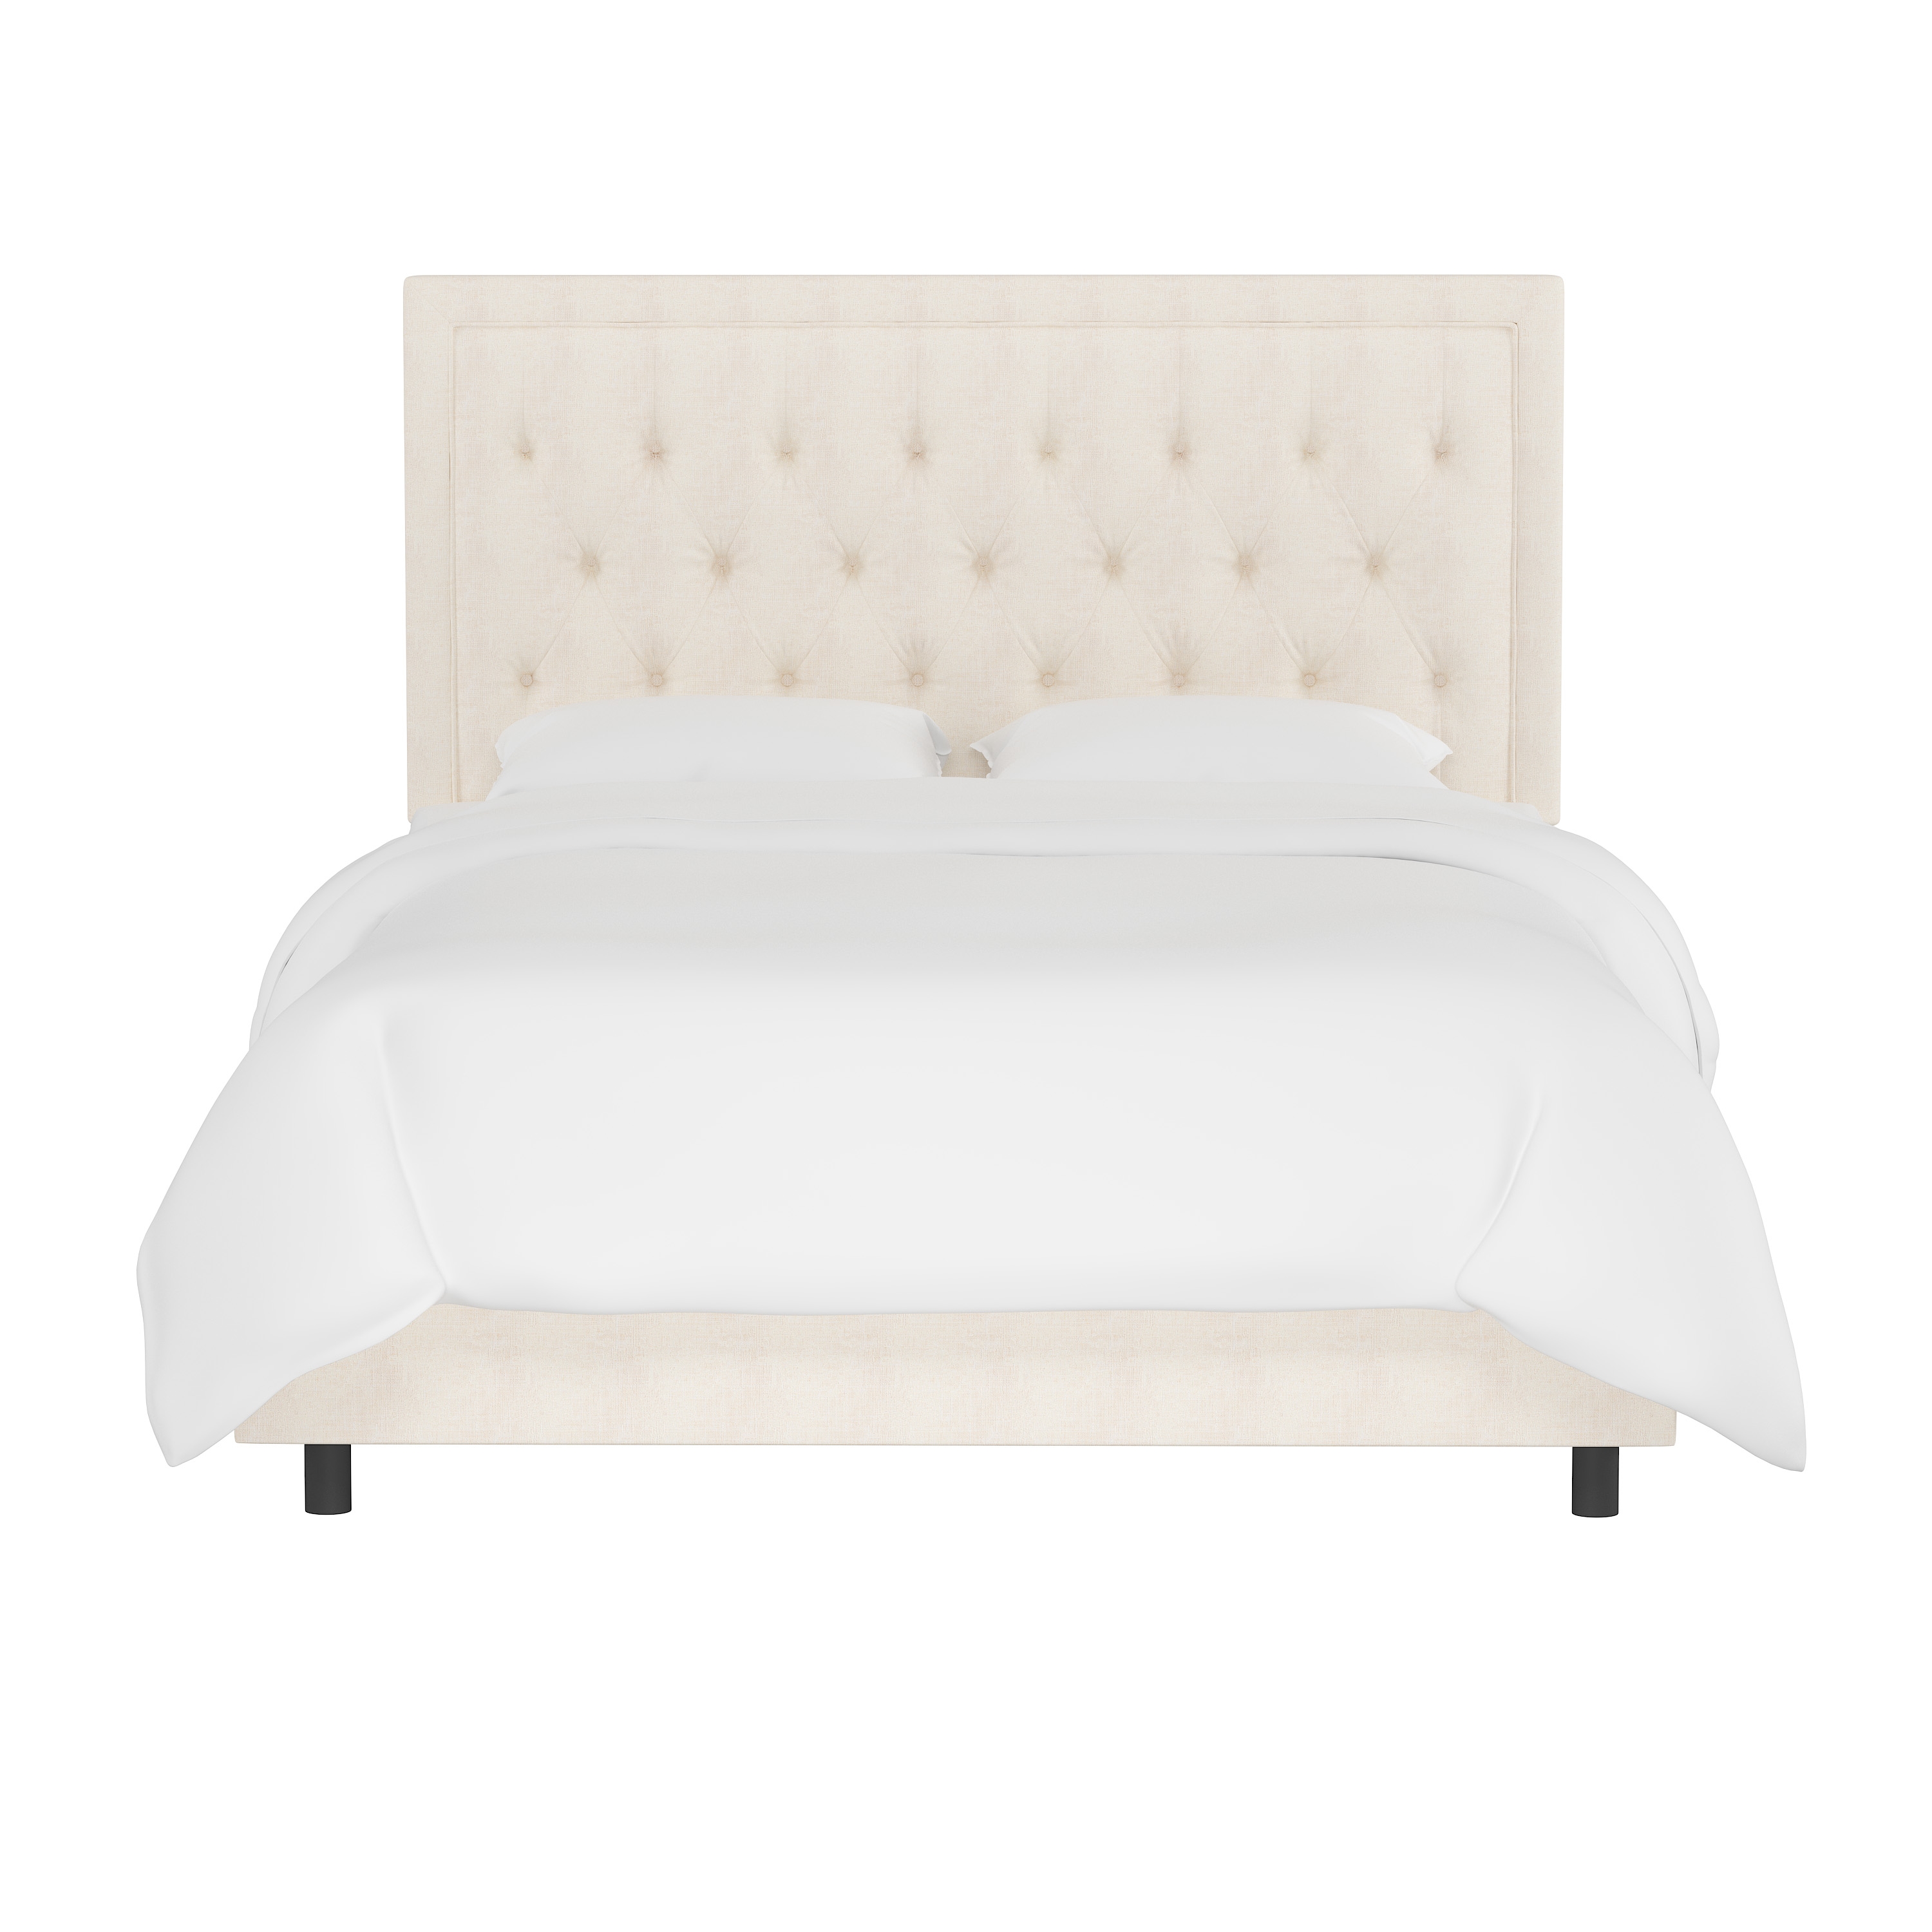 Lafayette Bed, Queen, White - Image 1